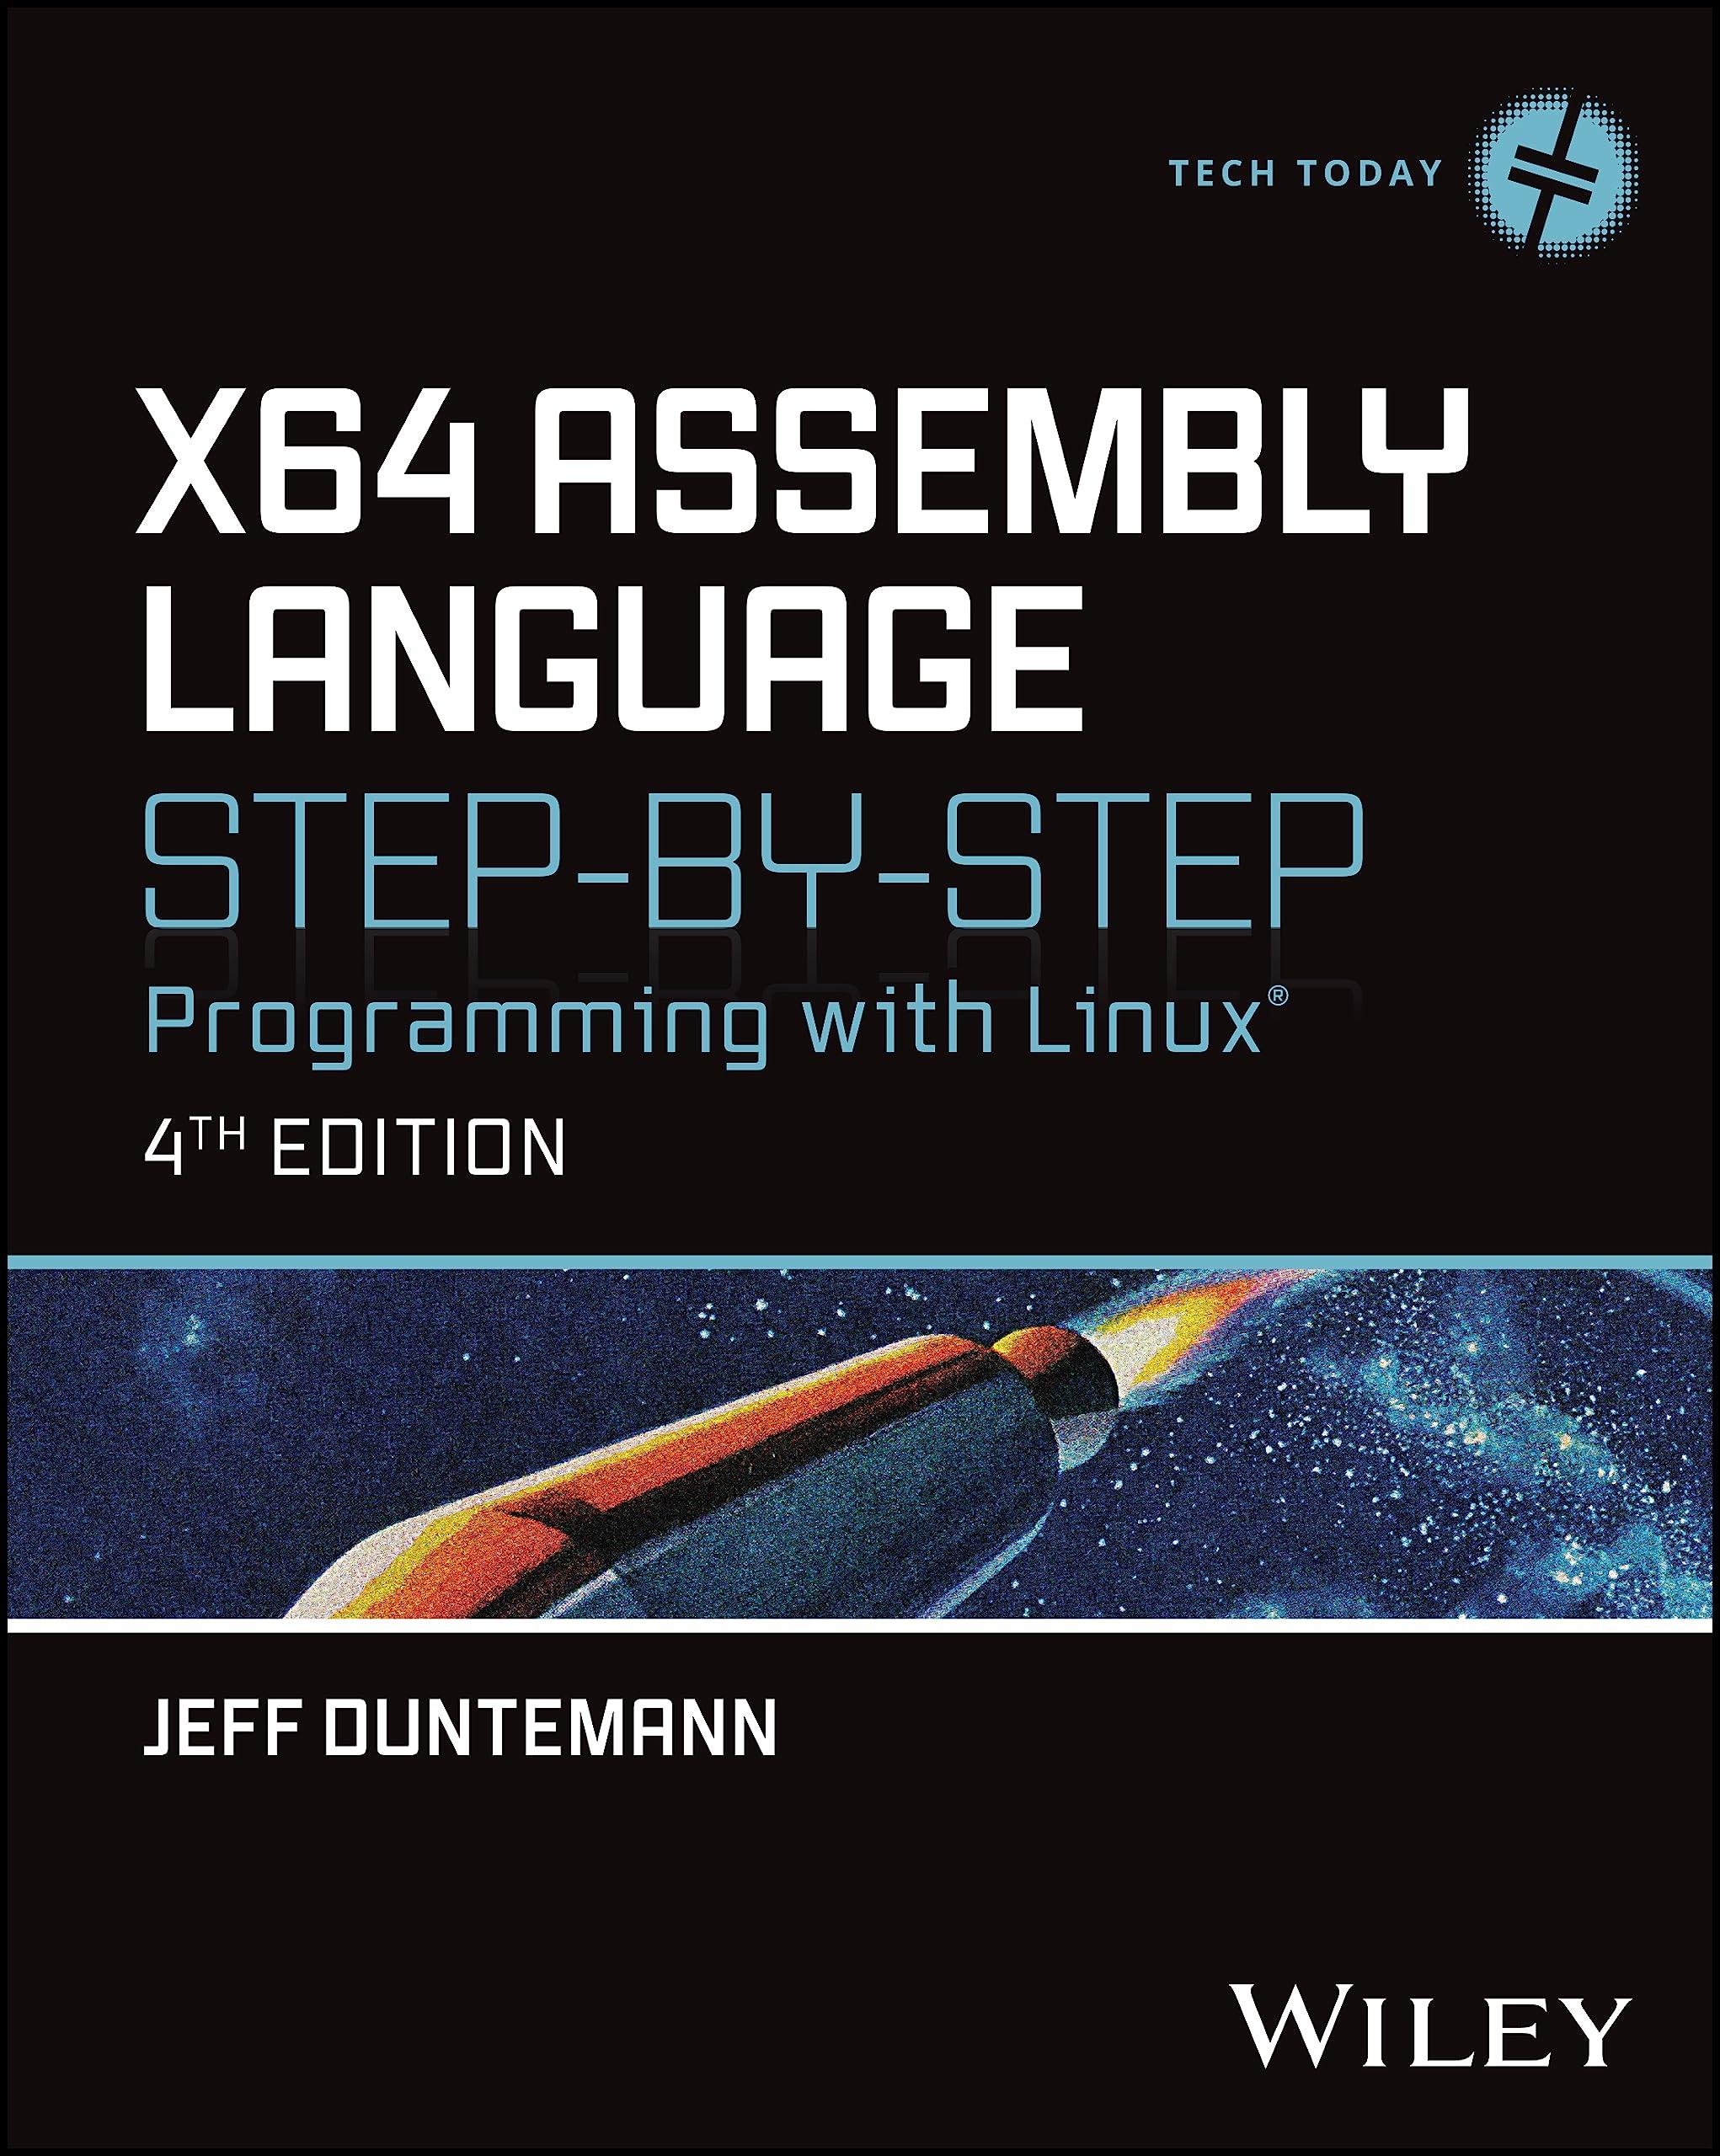 x64 assembly language step by step programming with linux 4th edition jeffrey duntemann 1394155247,